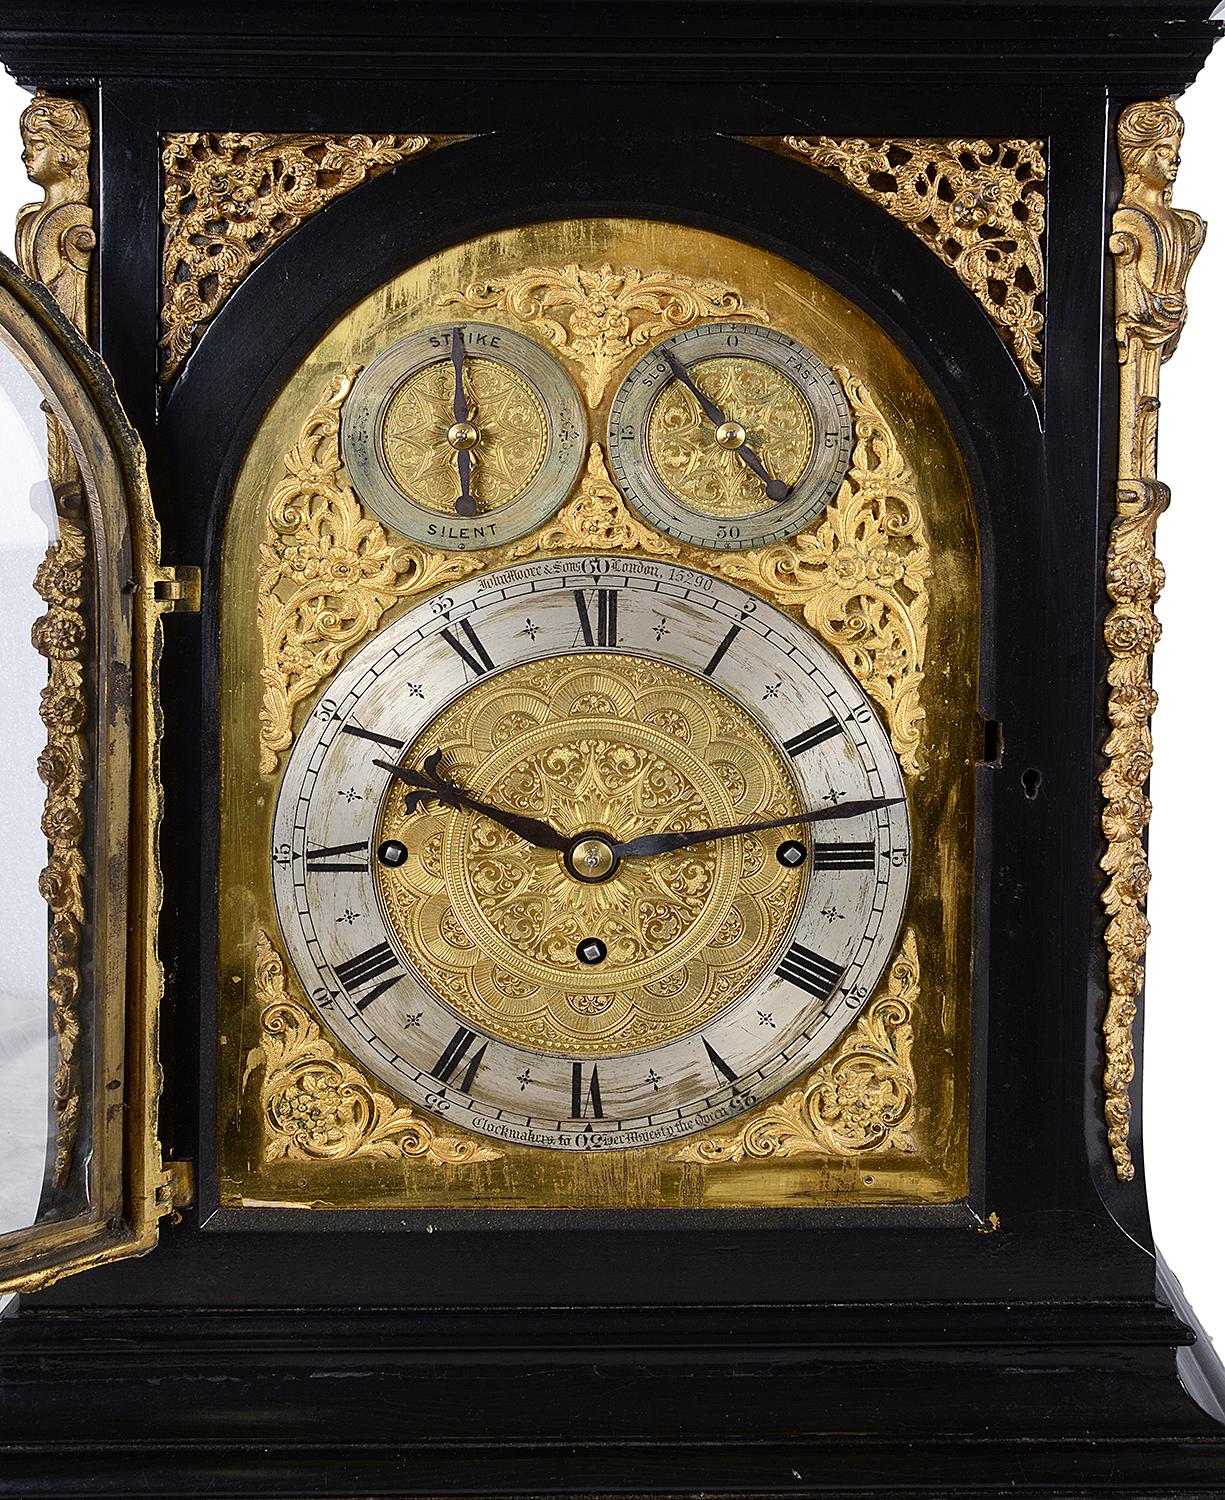 A very impressive late 19th Century ebonized arch dial, musical bracket clock, having wonderful gilded ormolu mounts, a Westminster chime on bells and a gong, a strike / silent option, an eight day duration movement that strikes on the hour and half